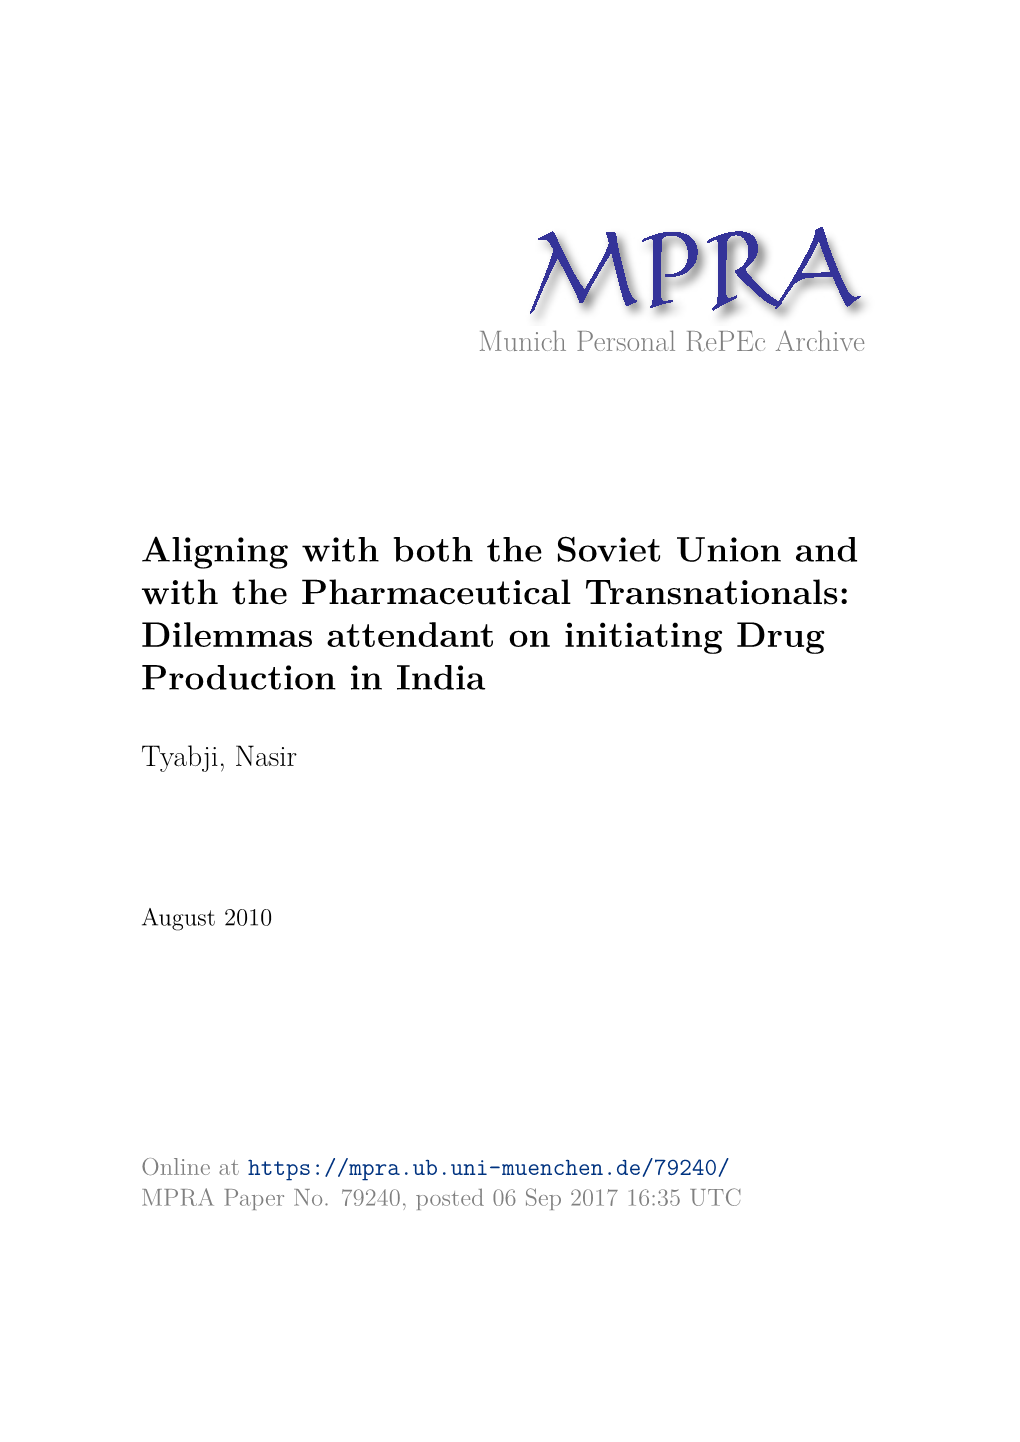 Aligning with Both the Soviet Union and with the Pharmaceutical Transnationals: Dilemmas Attendant on Initiating Drug Production in India